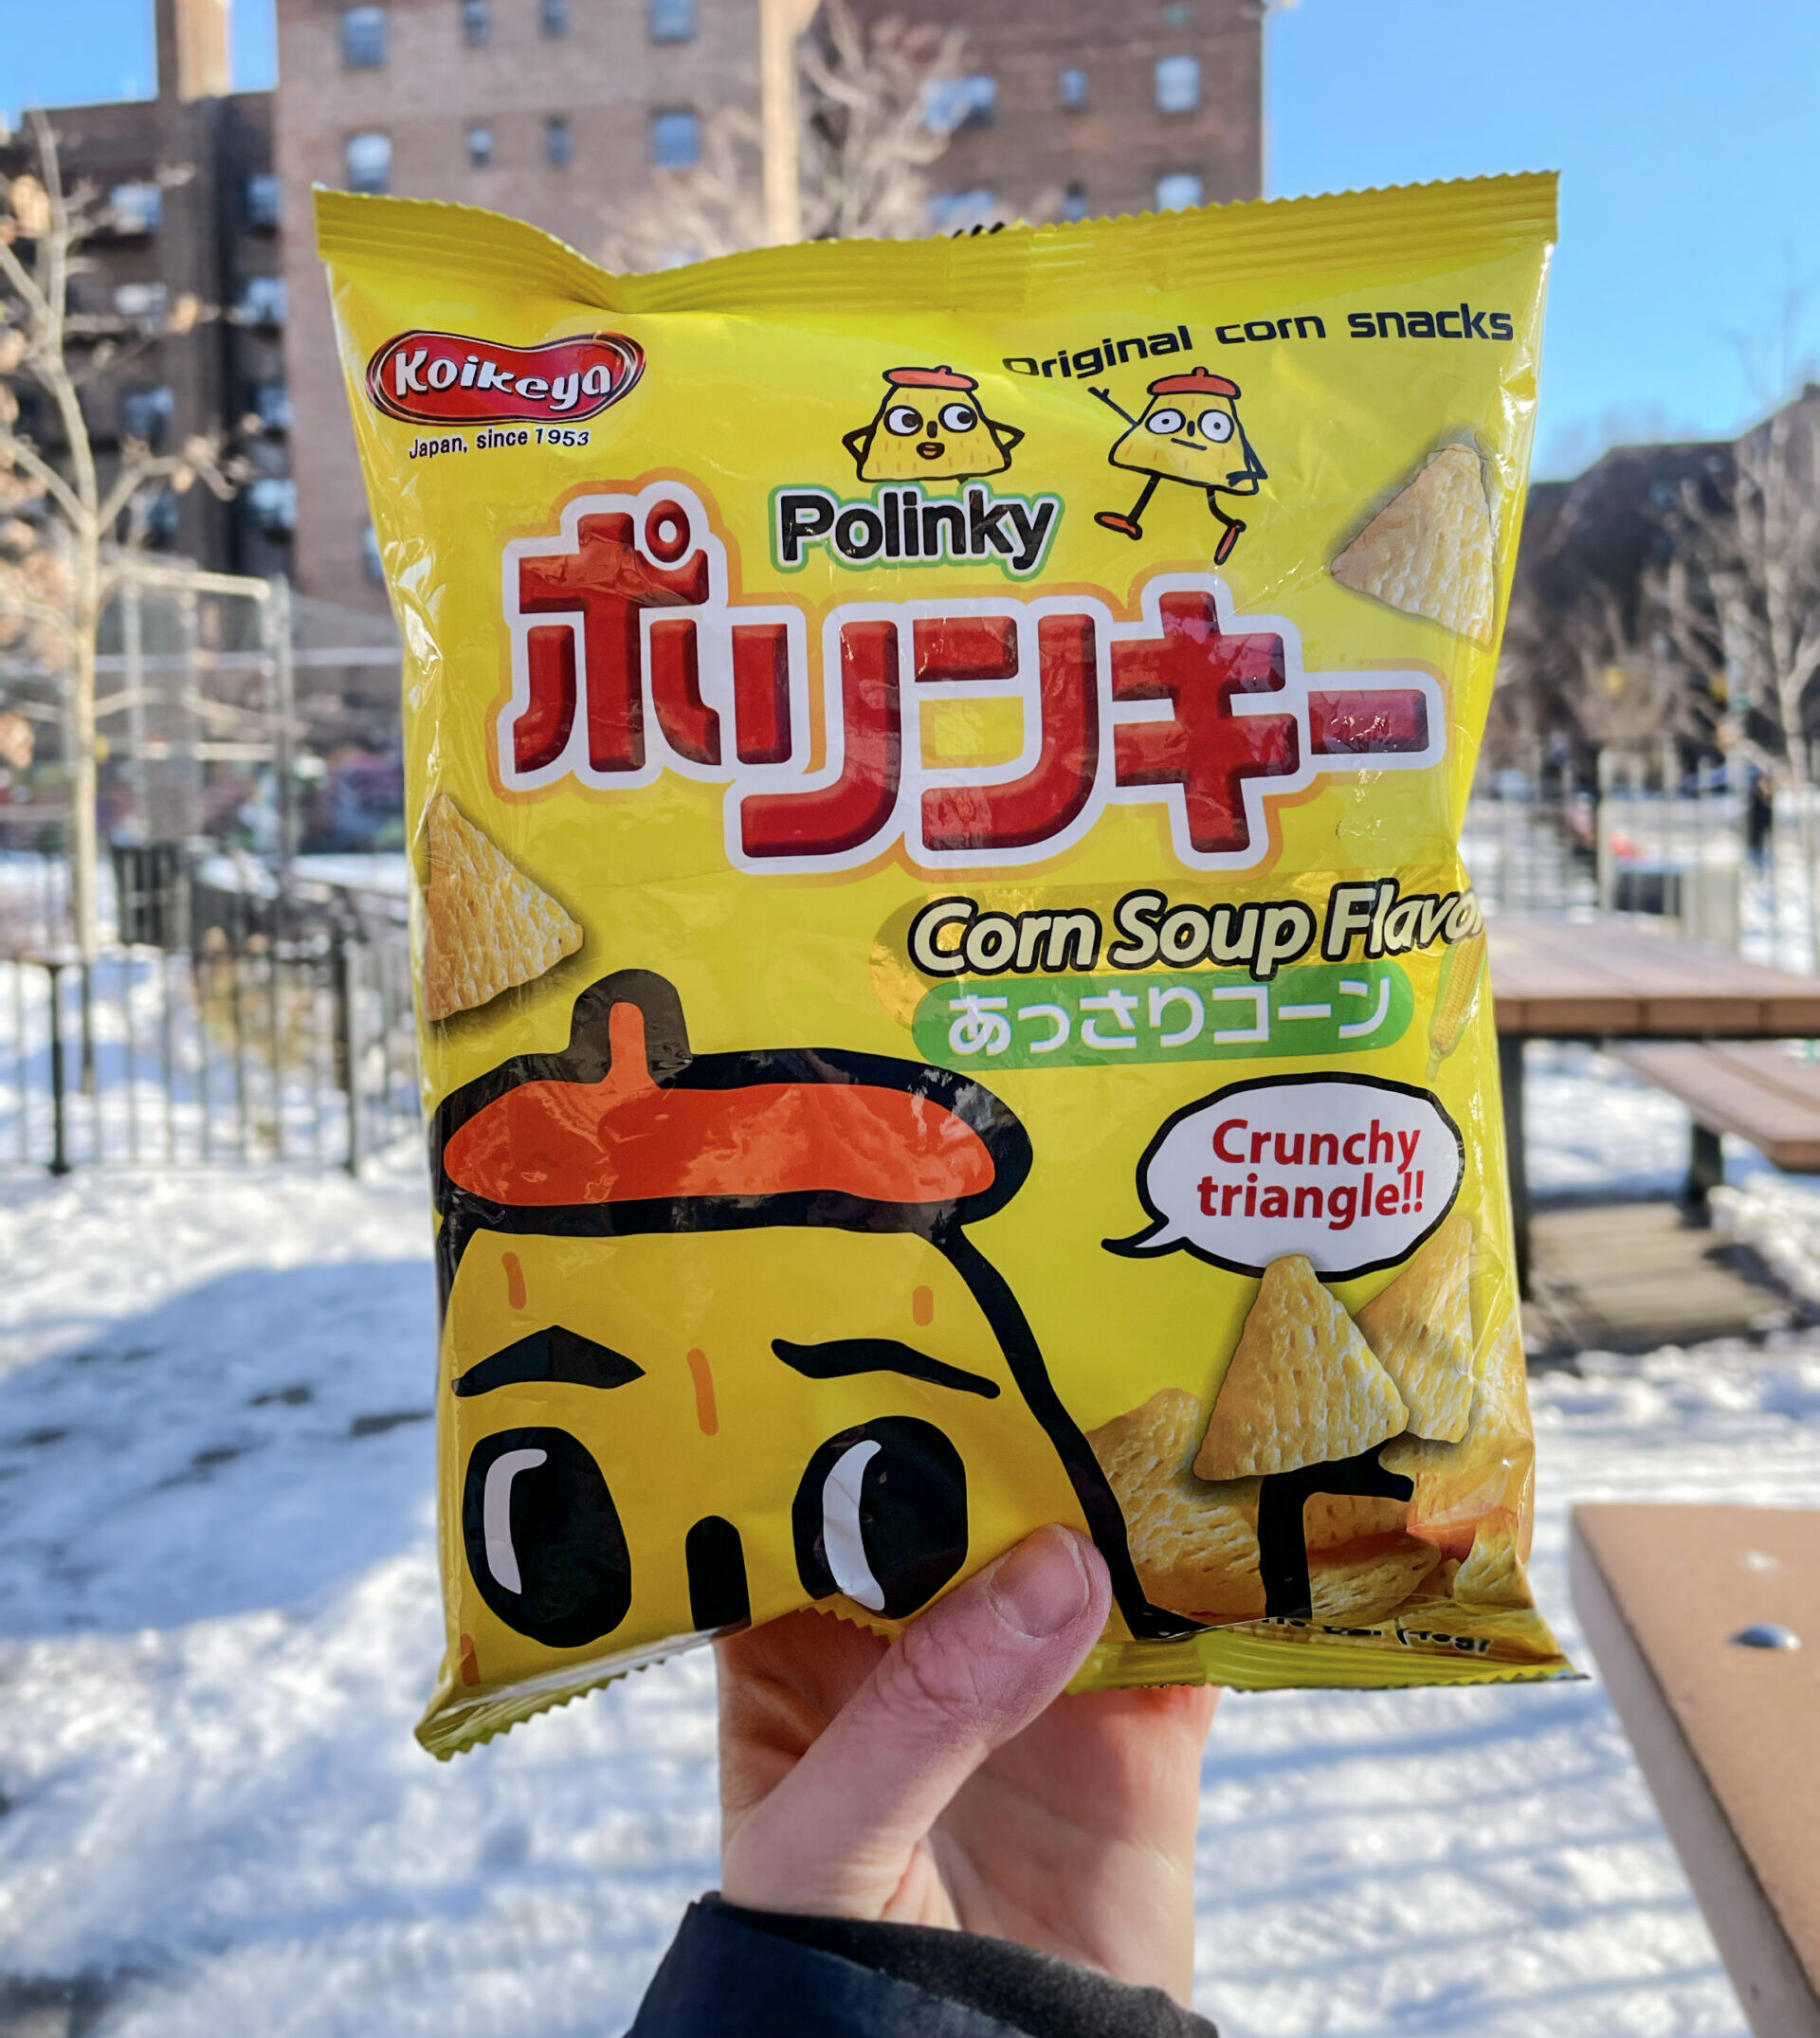 Polinky Japanese Snack Review - a bag of Corn Soup Flavor Polinky being held outside